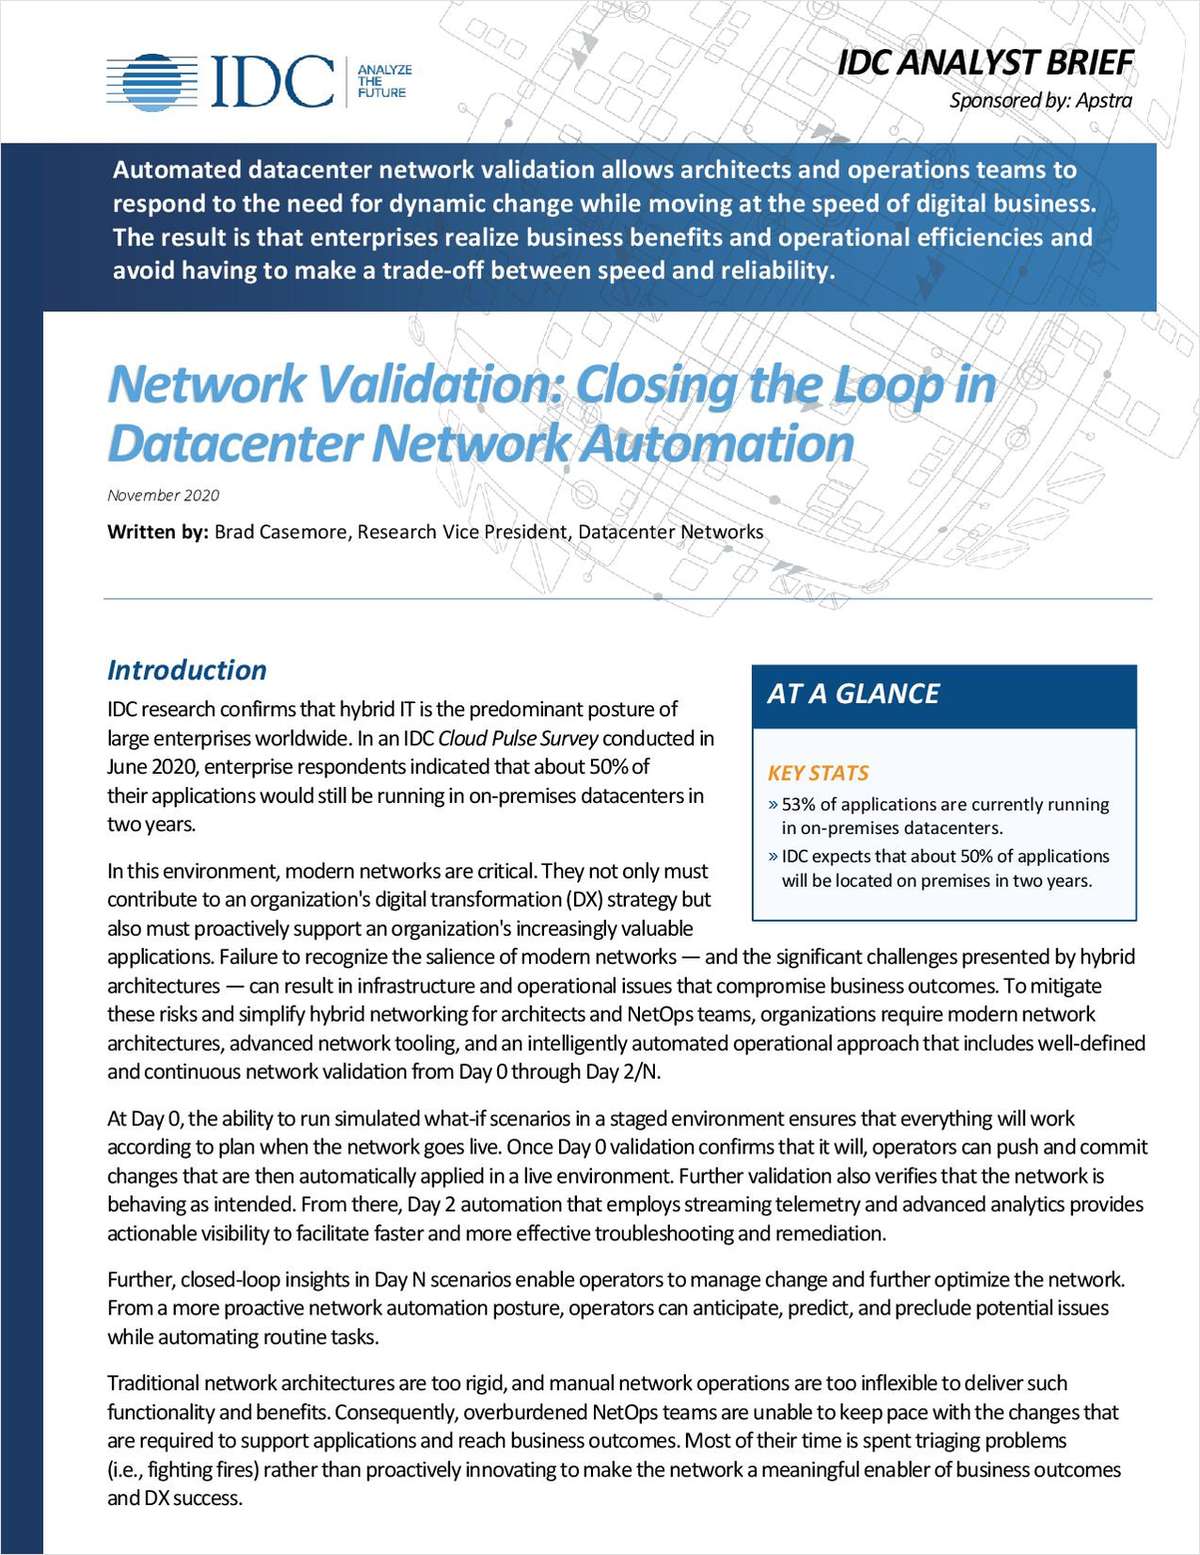 Network Validation: Closing the Loop in Datacenter Network Automation